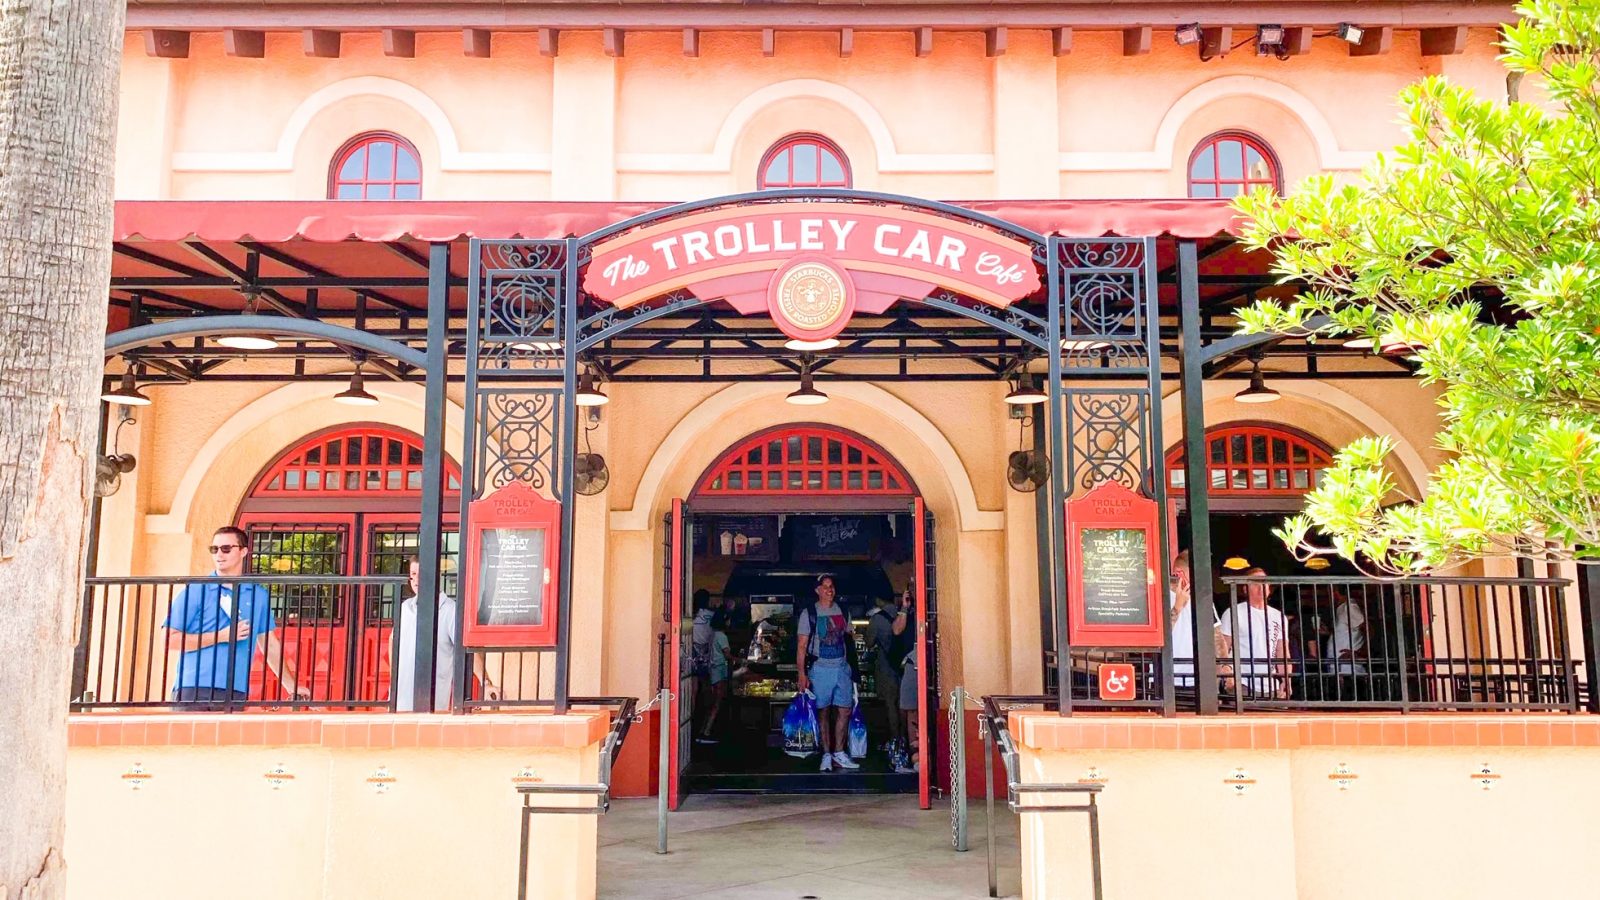 outside the entrance to the Trolley Car Cafe